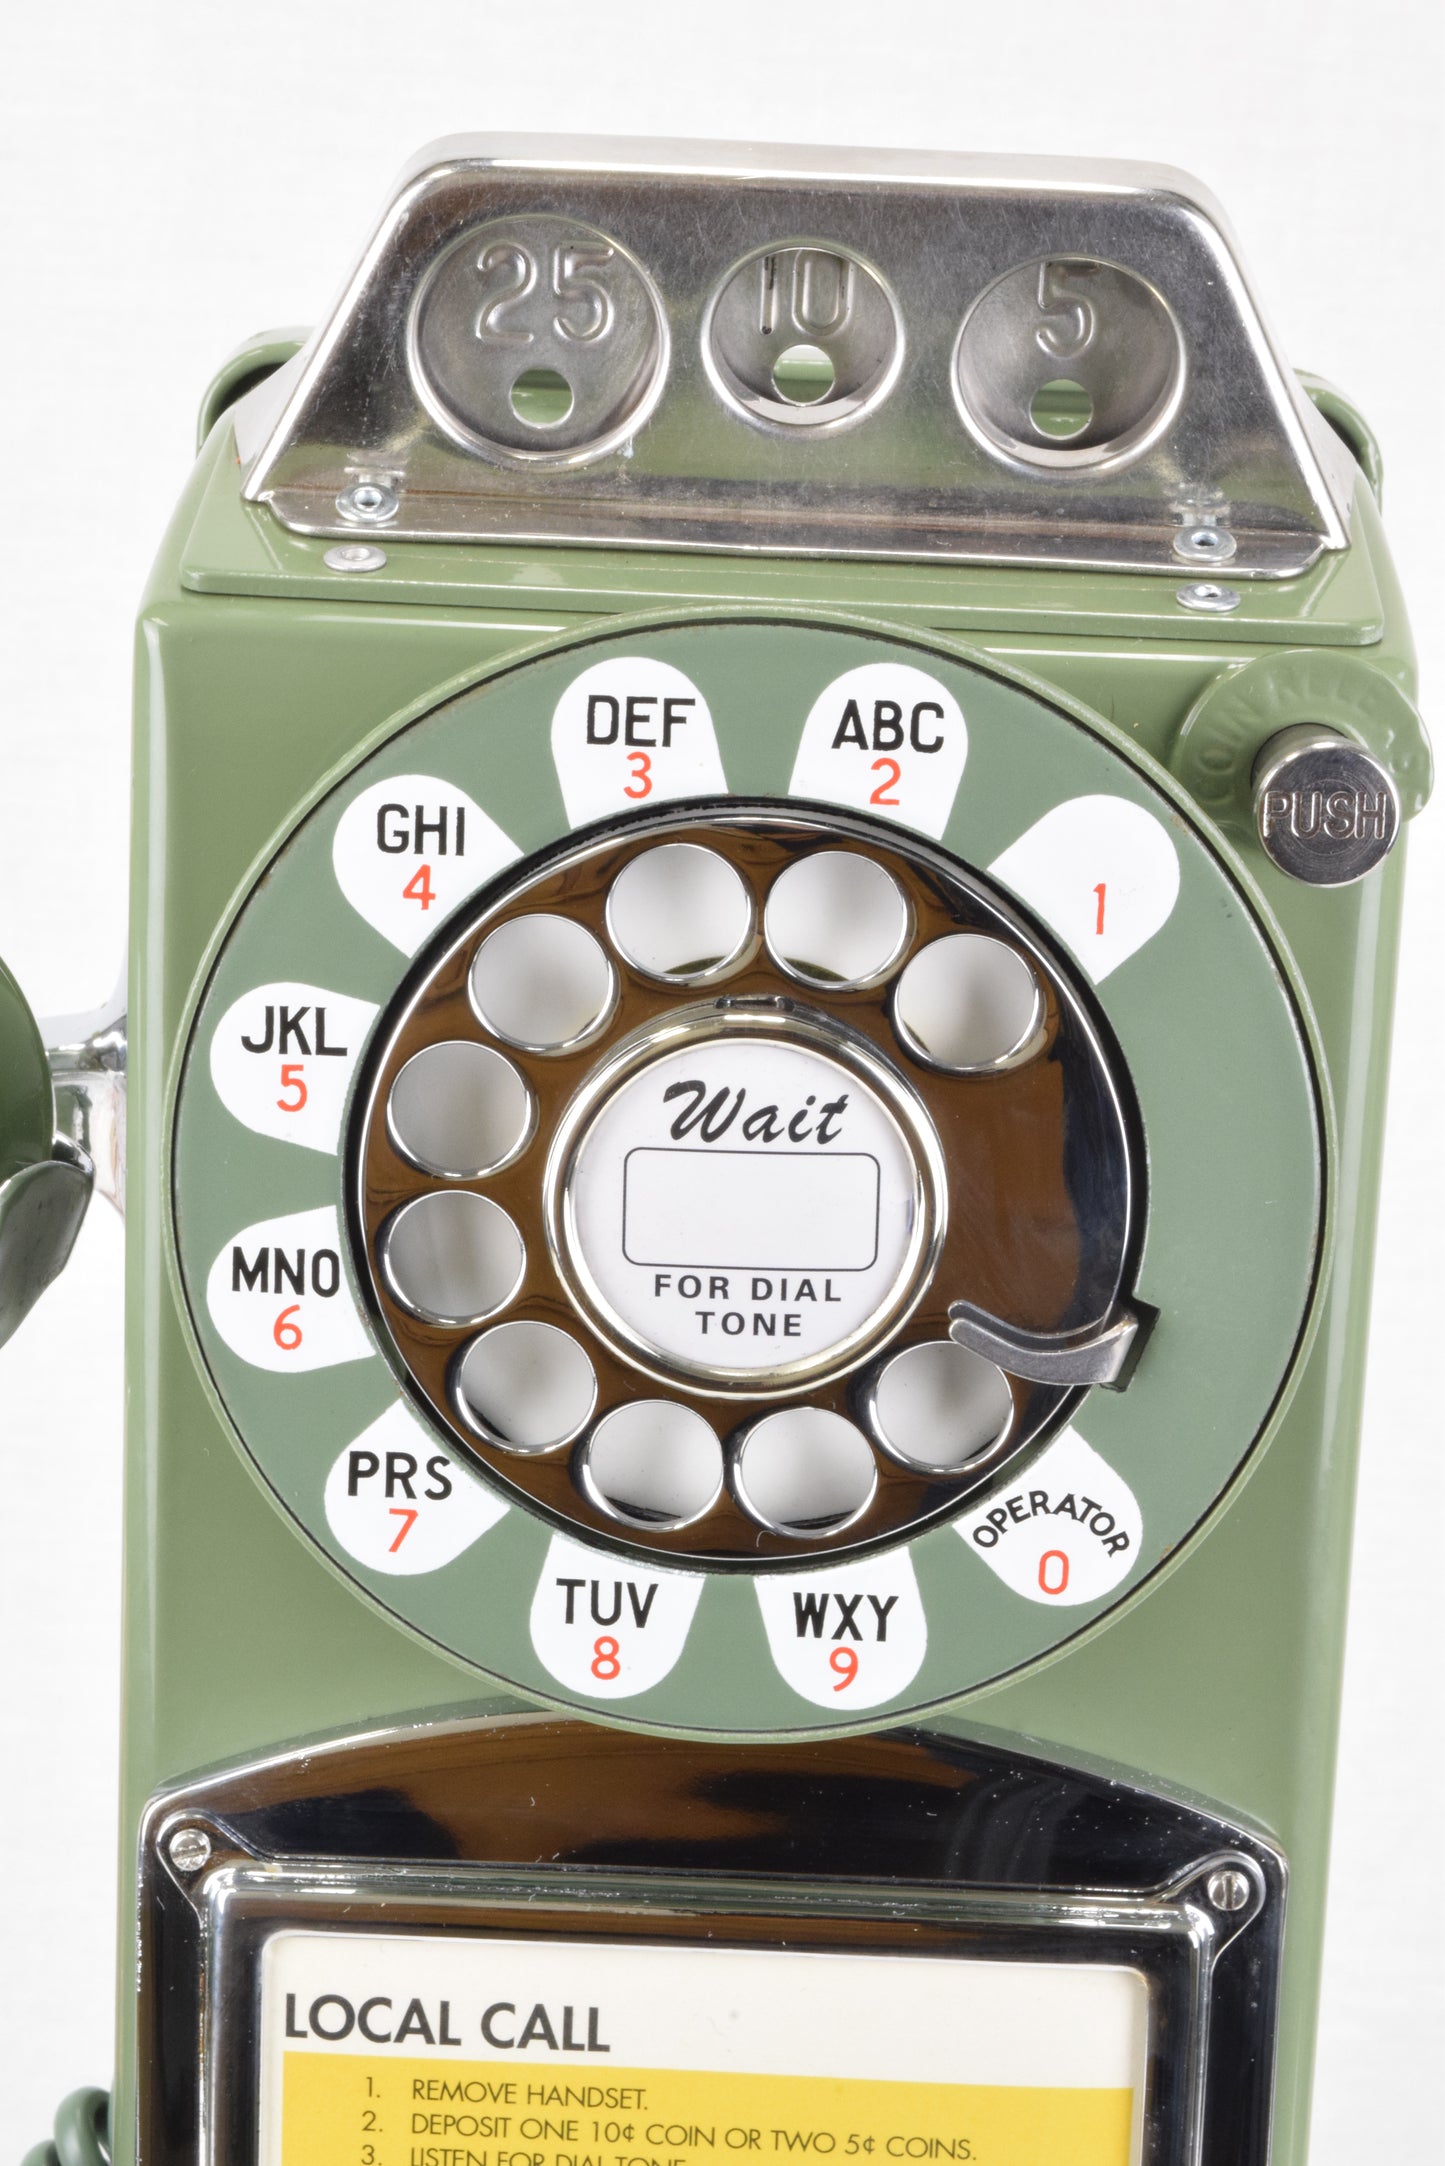 Northern or Western Electric - 233 - Moss Green Payphone